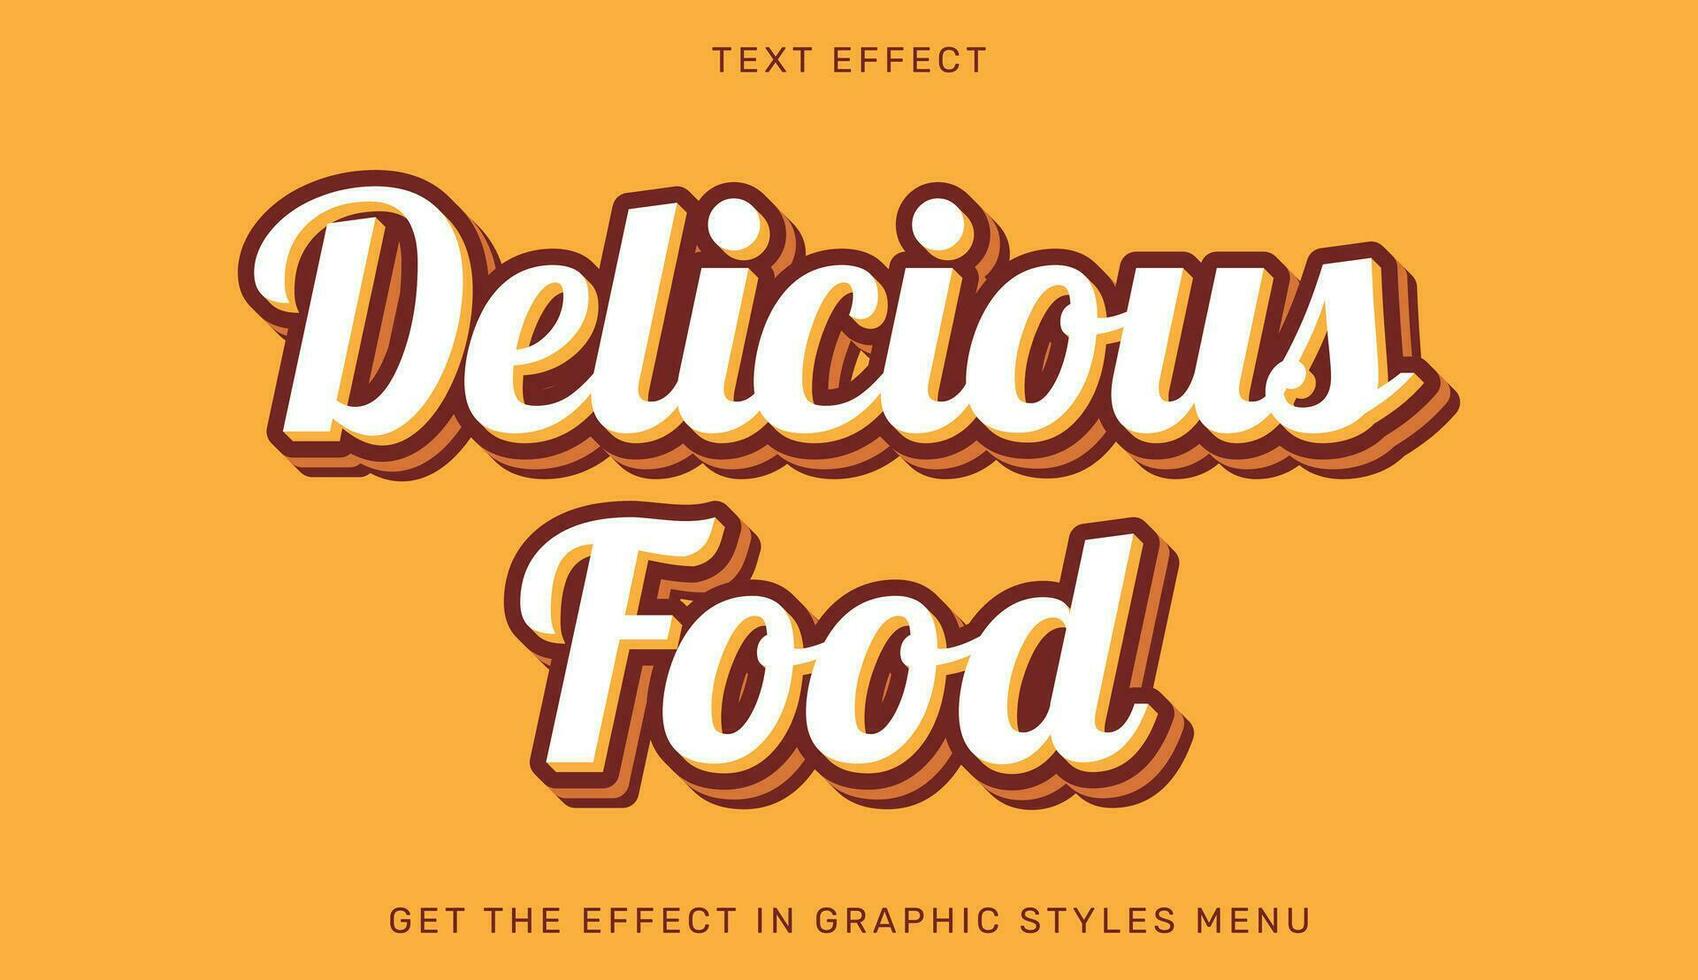 Delicious food editable text effect in 3d style. Text emblem for advertising, branding and business logo vector